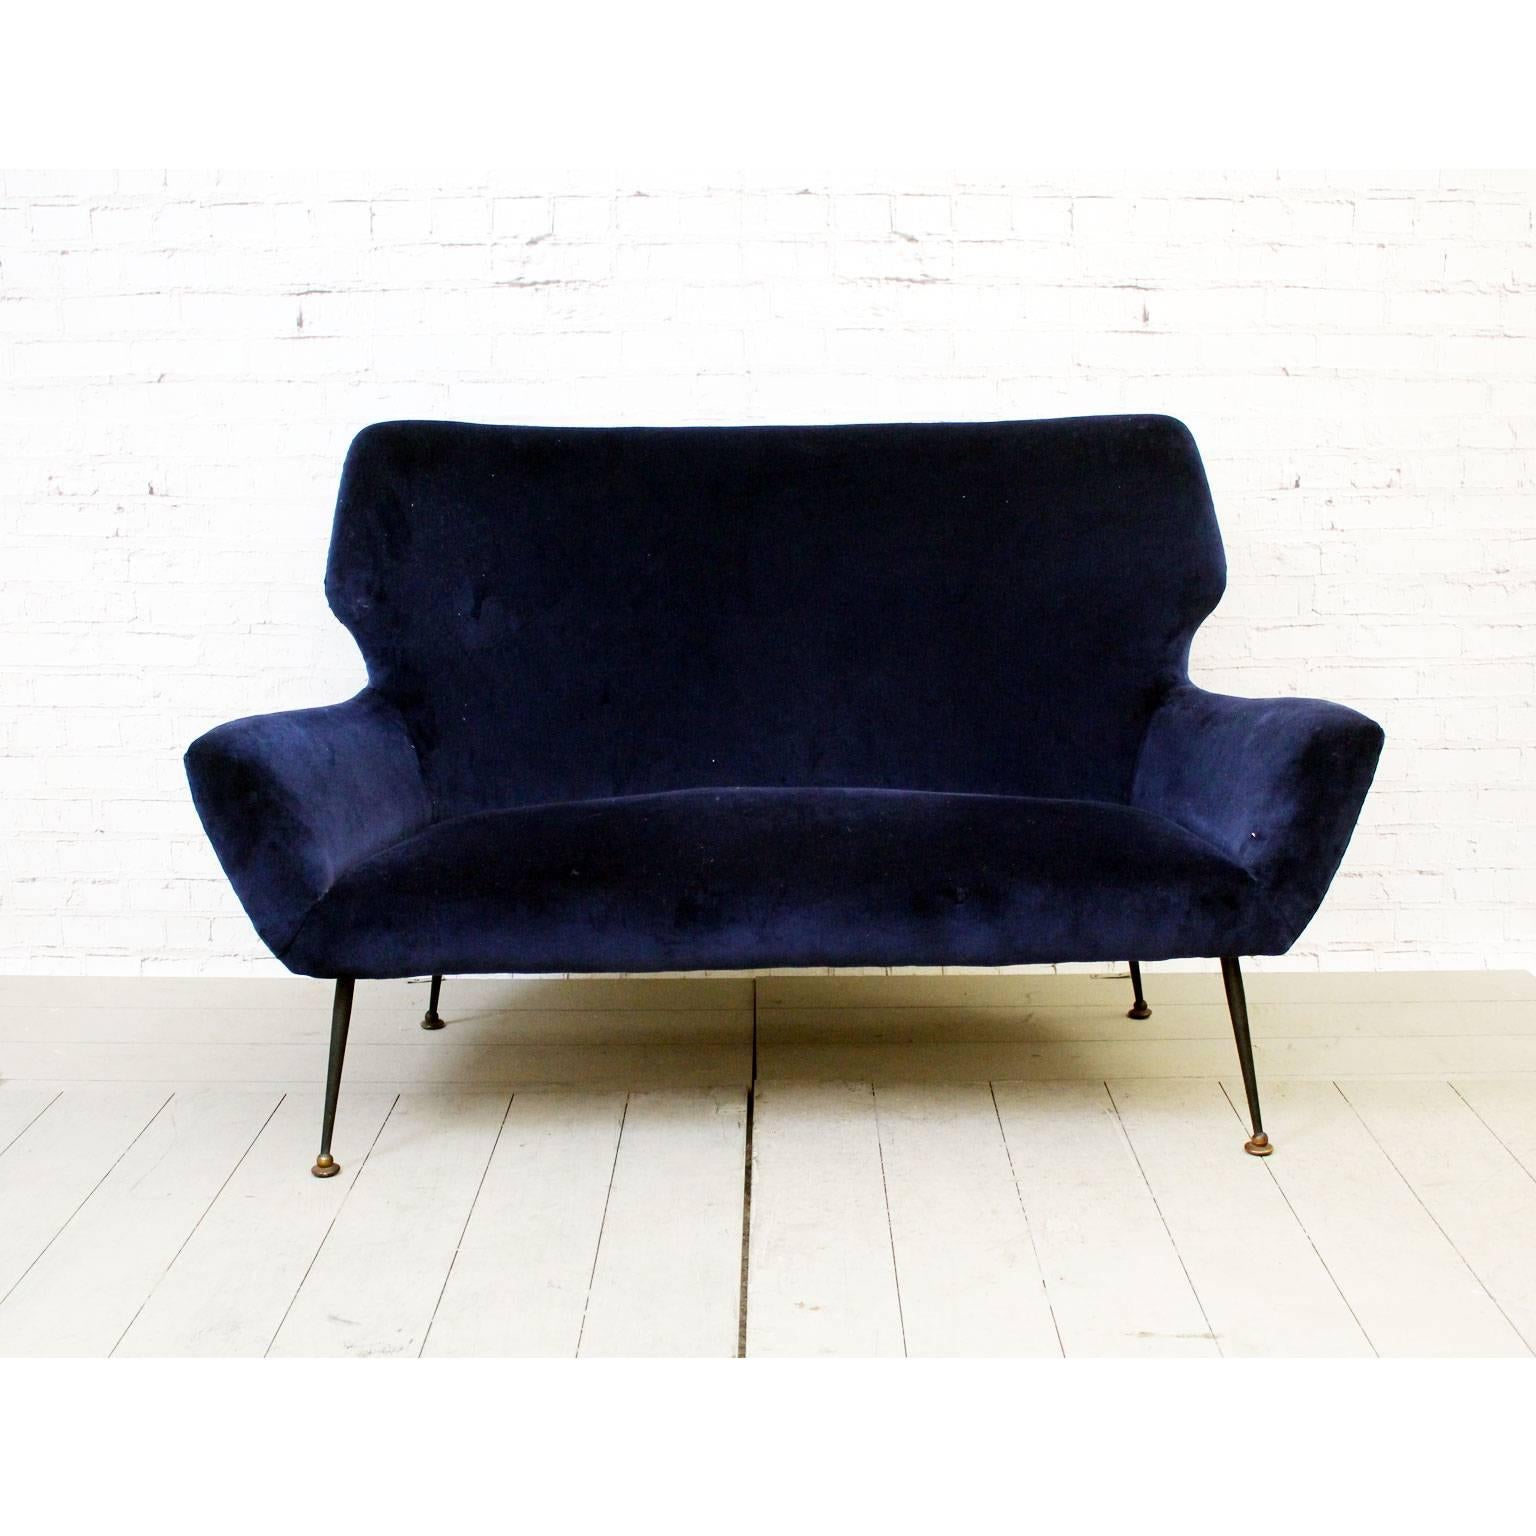 This incredibly stylish two-seat Italian sofa is of the highest quality. We love the design and especially the splayed black legs on brass feet and unusual shape. What is wonderful about this particular sofa is it's compact size. We believe this